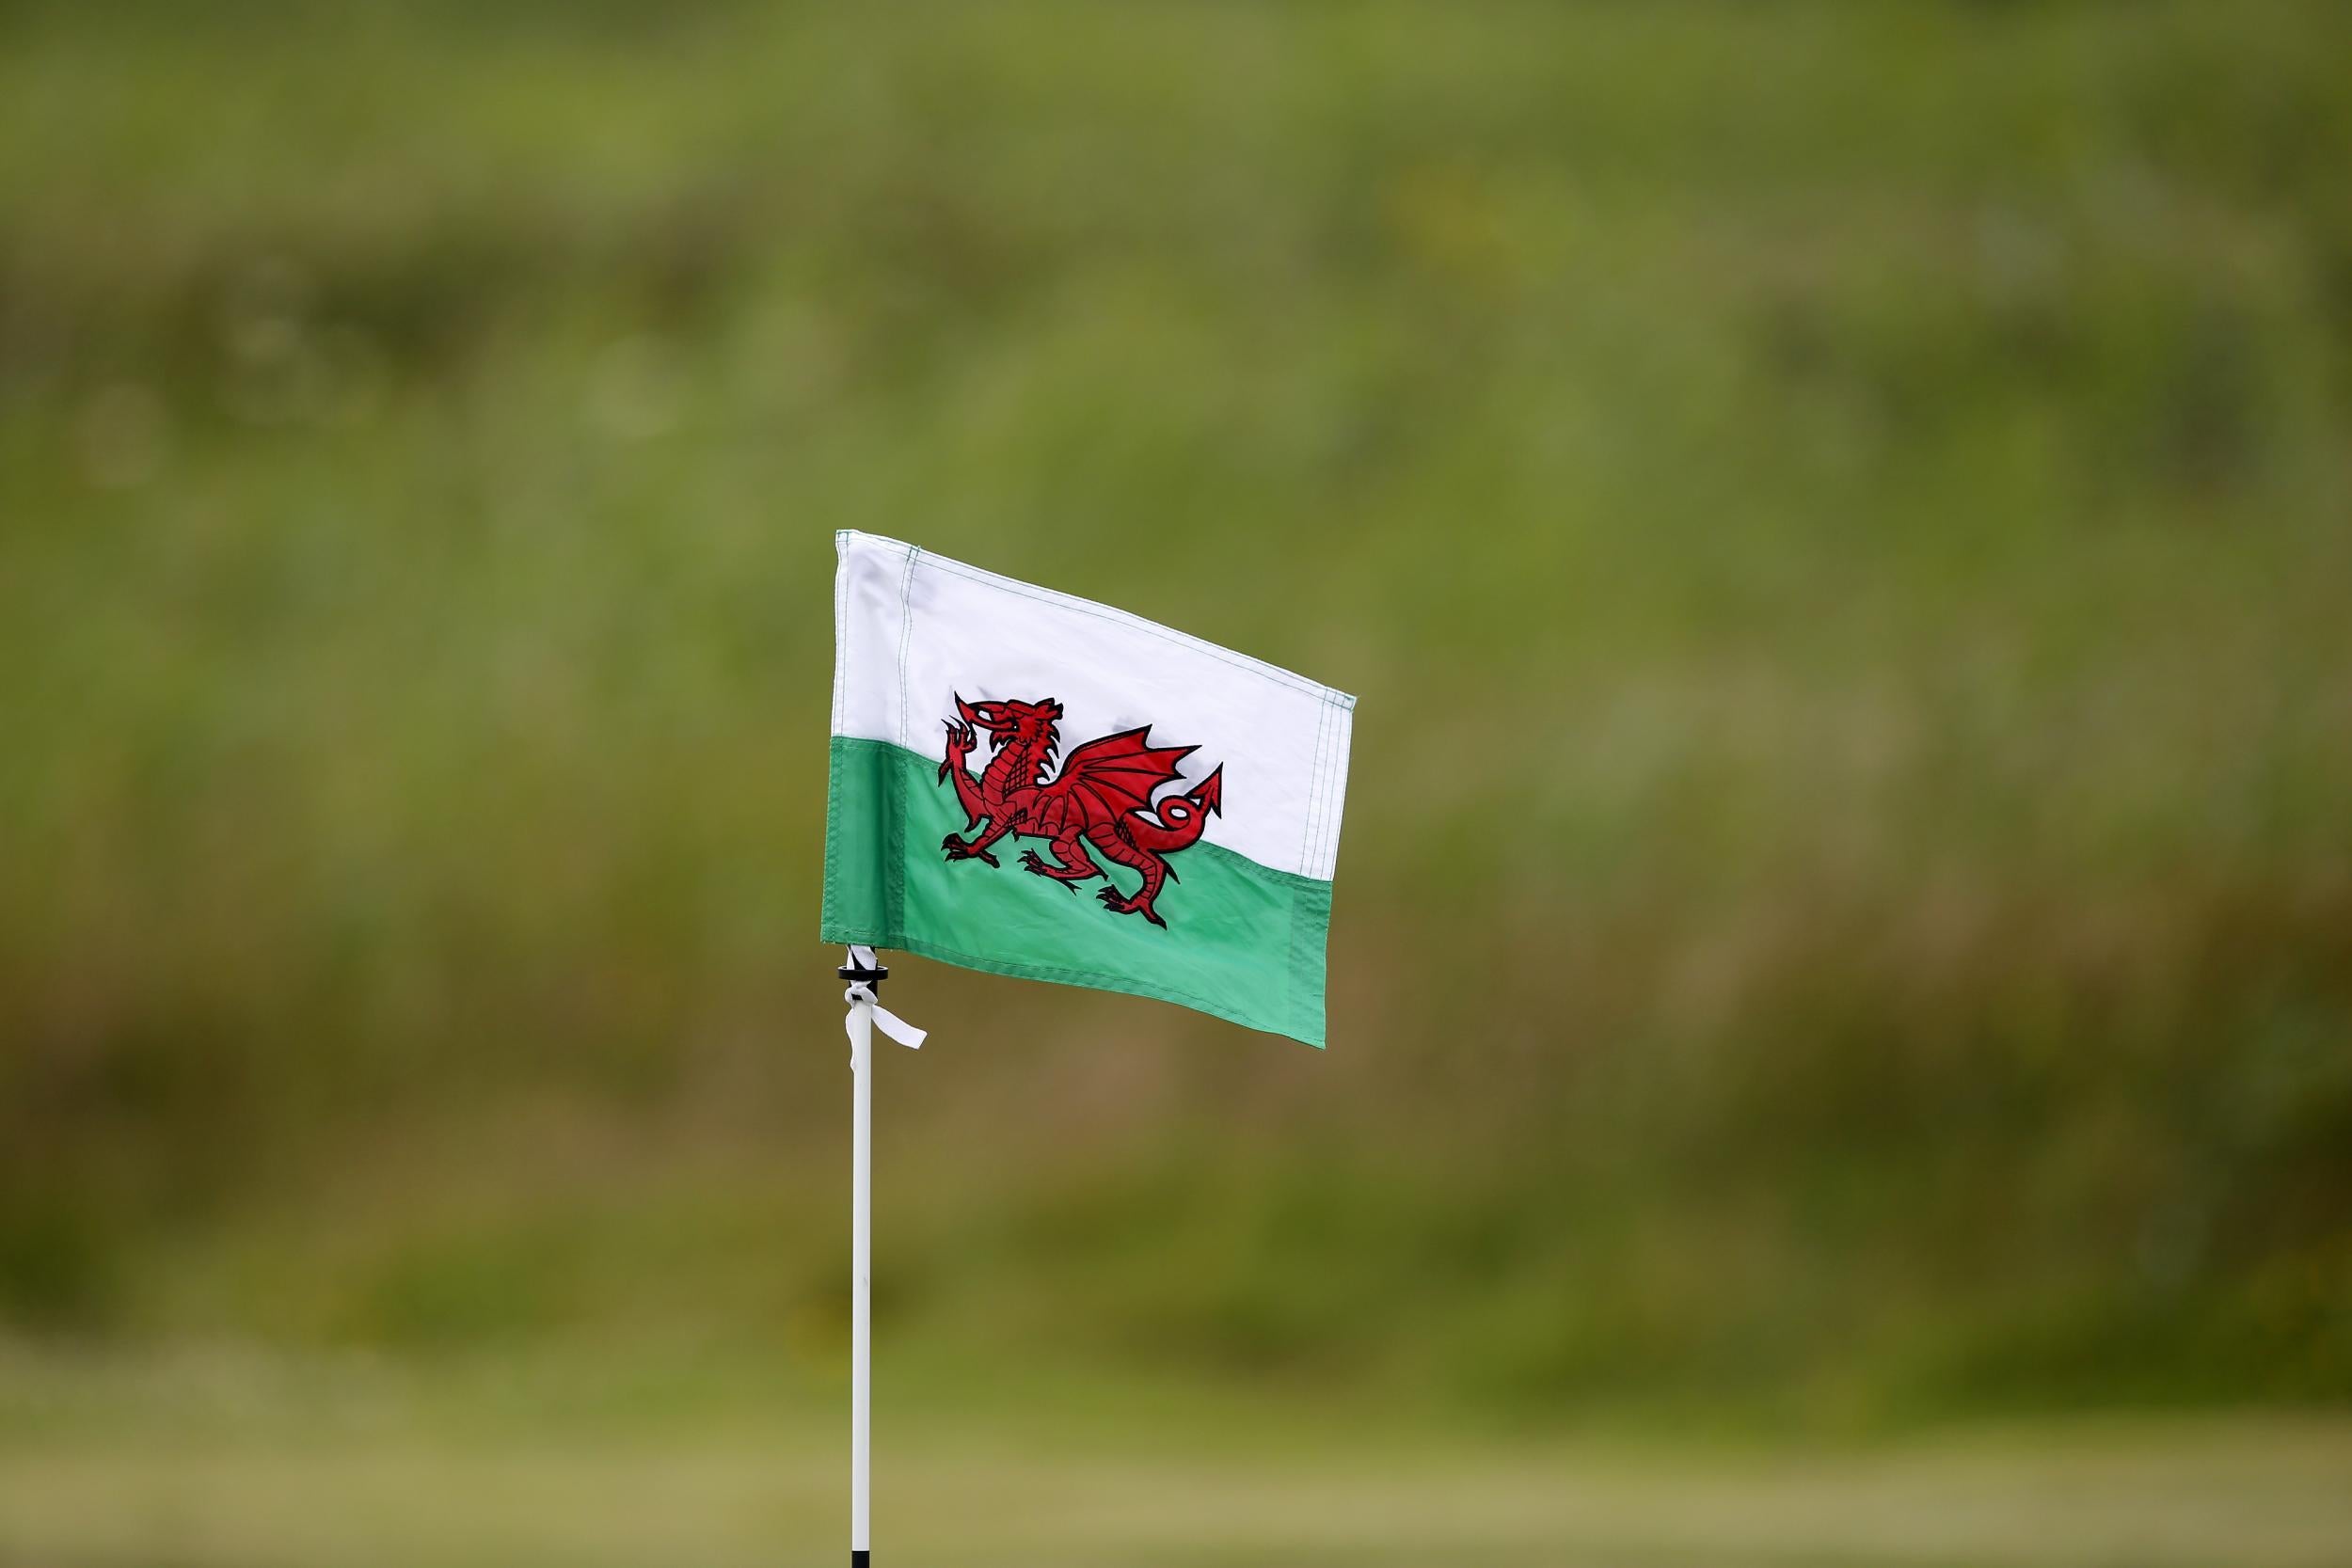 Wales finished bottom among the home nations of a study looking at quality of life.